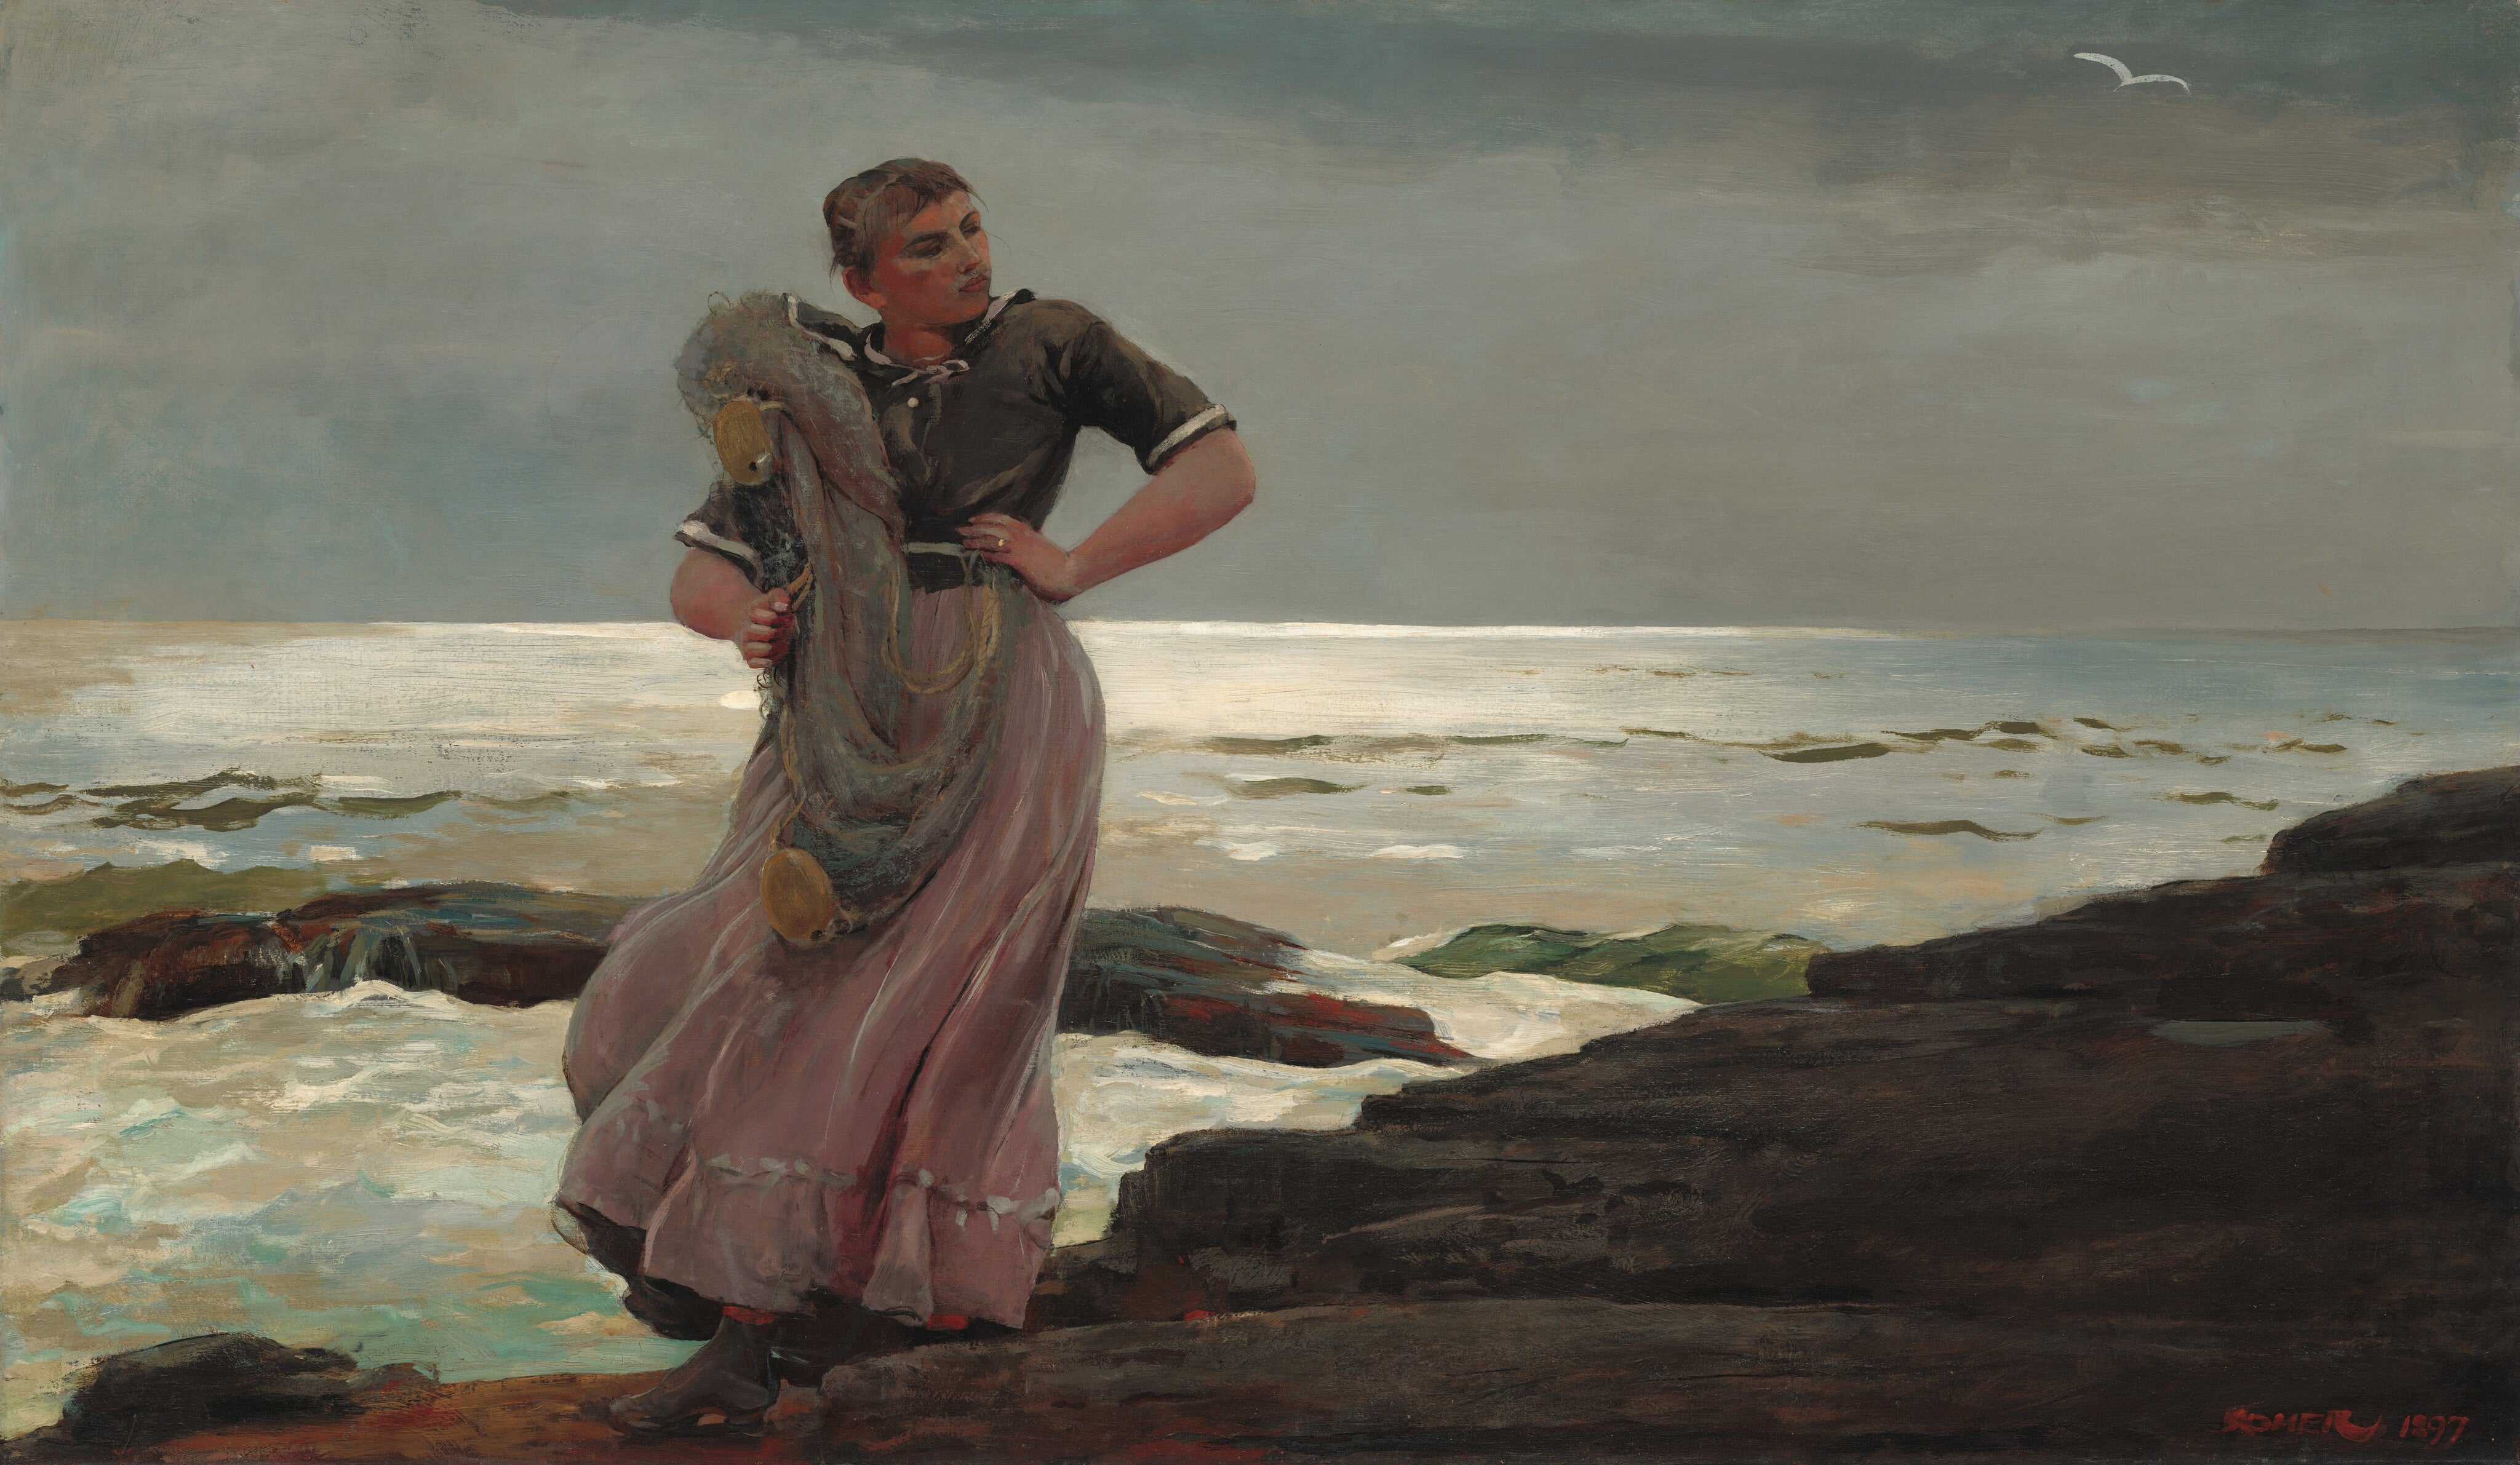 A Light on the Sea by Winslow Homer circa 1987